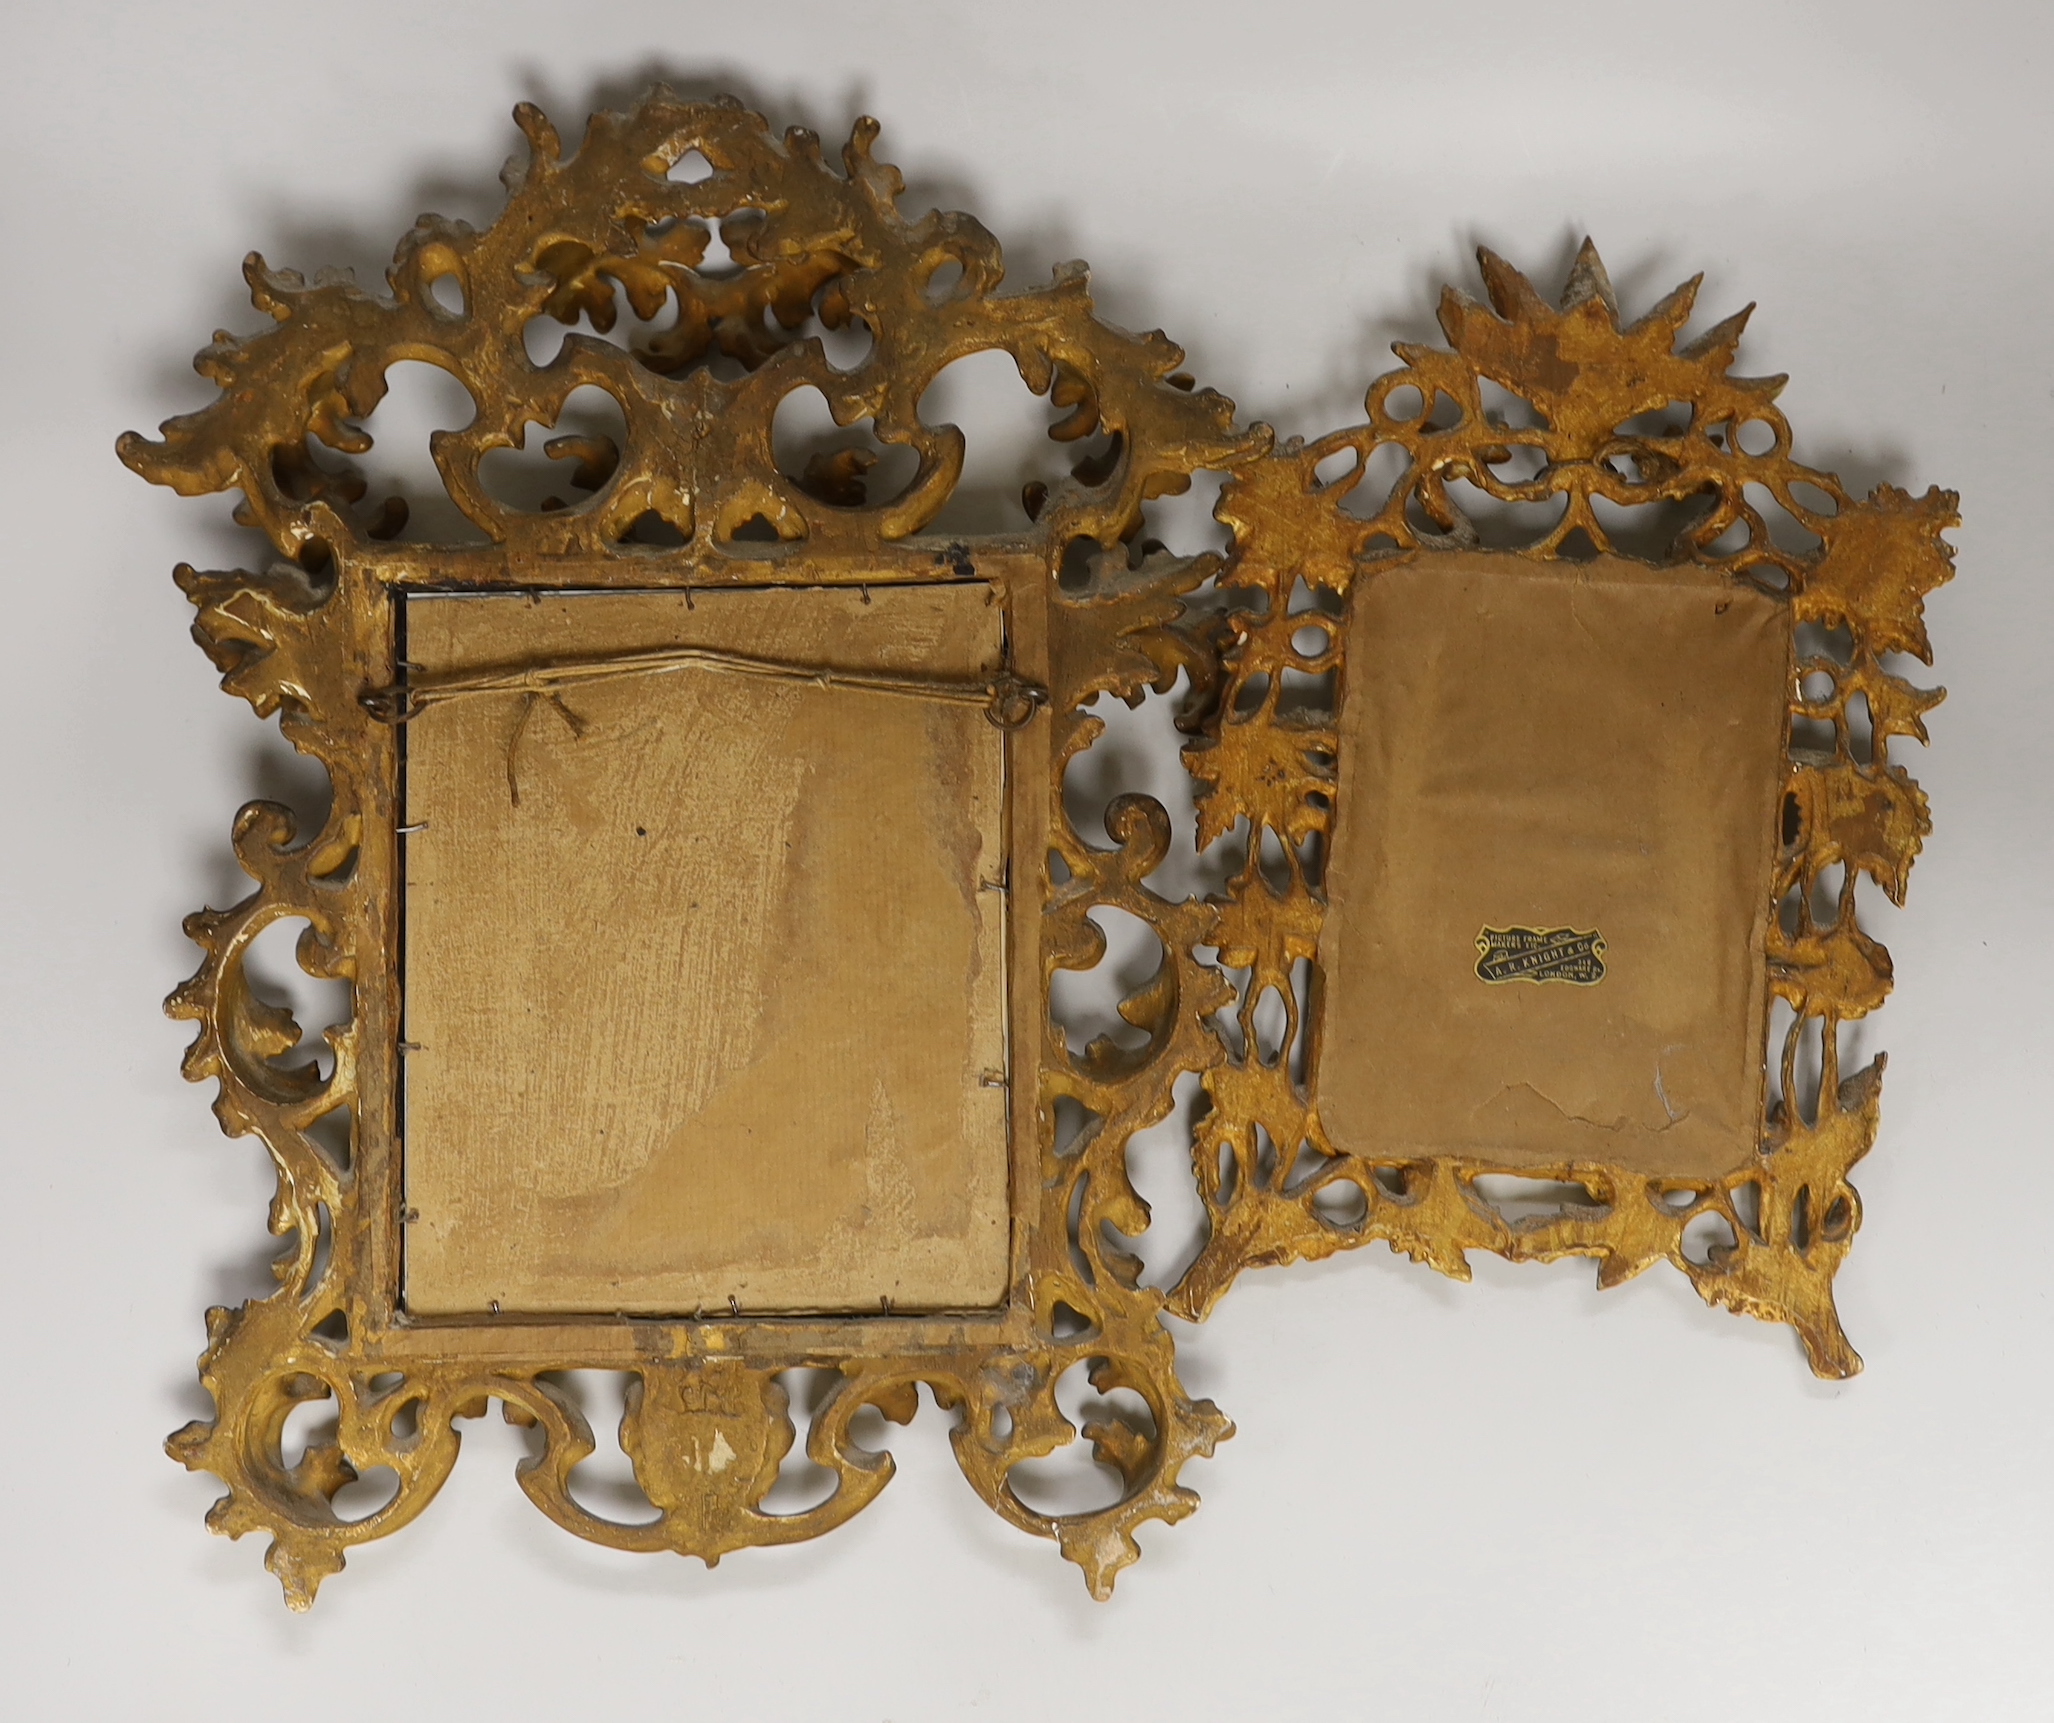 Two Florentine giltwood frames, one carved with leaves and flowers, the largest 41cm x 30cm - Image 2 of 2